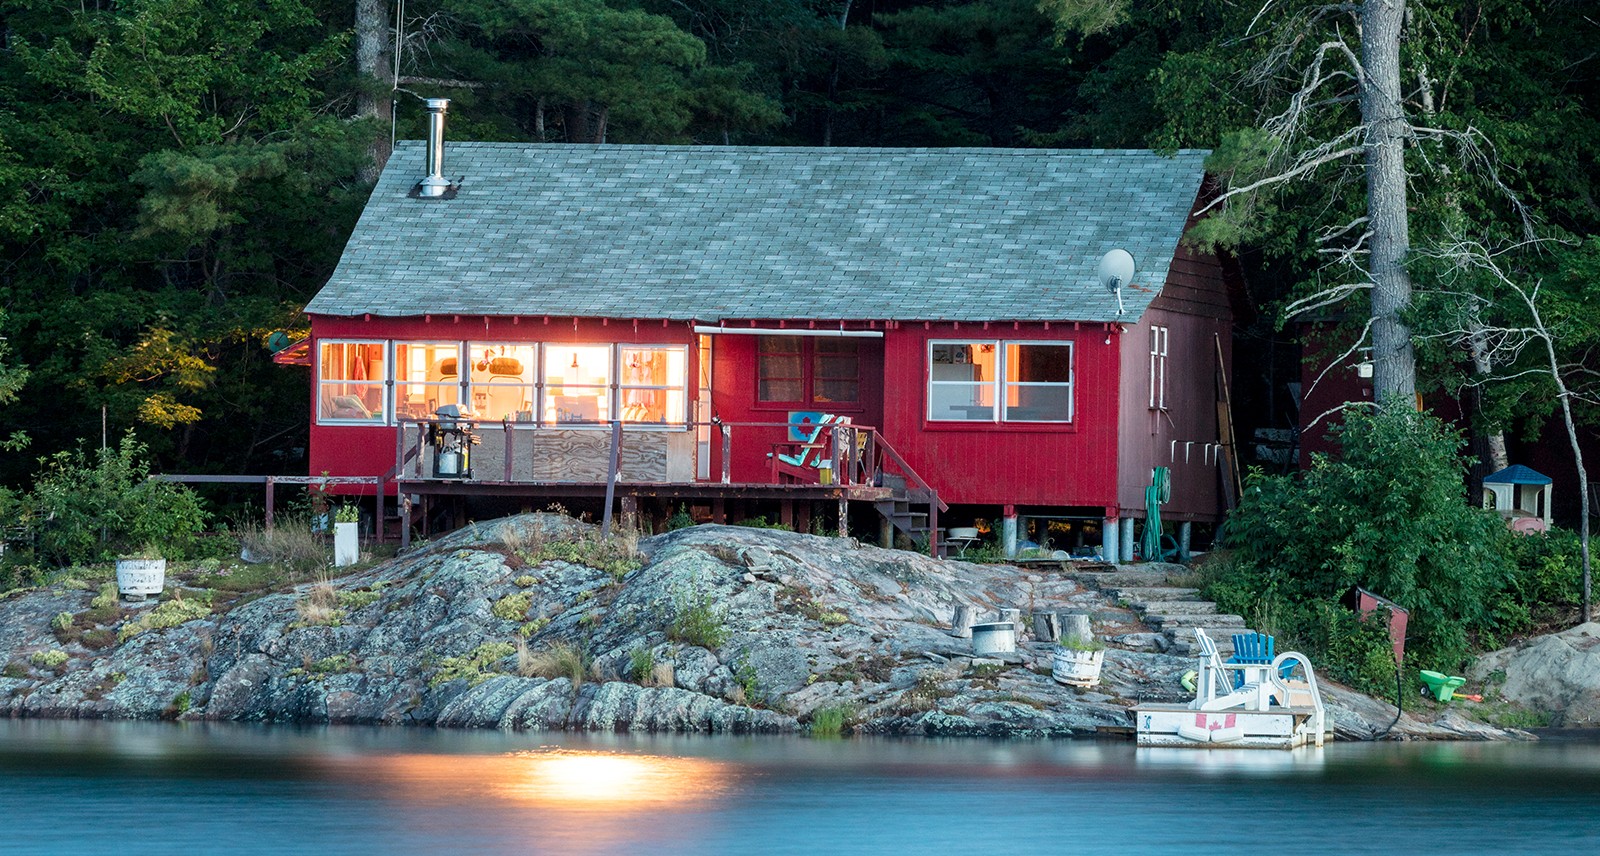 No, Being Canadian Doesn't Mean You Have to Love Cottages